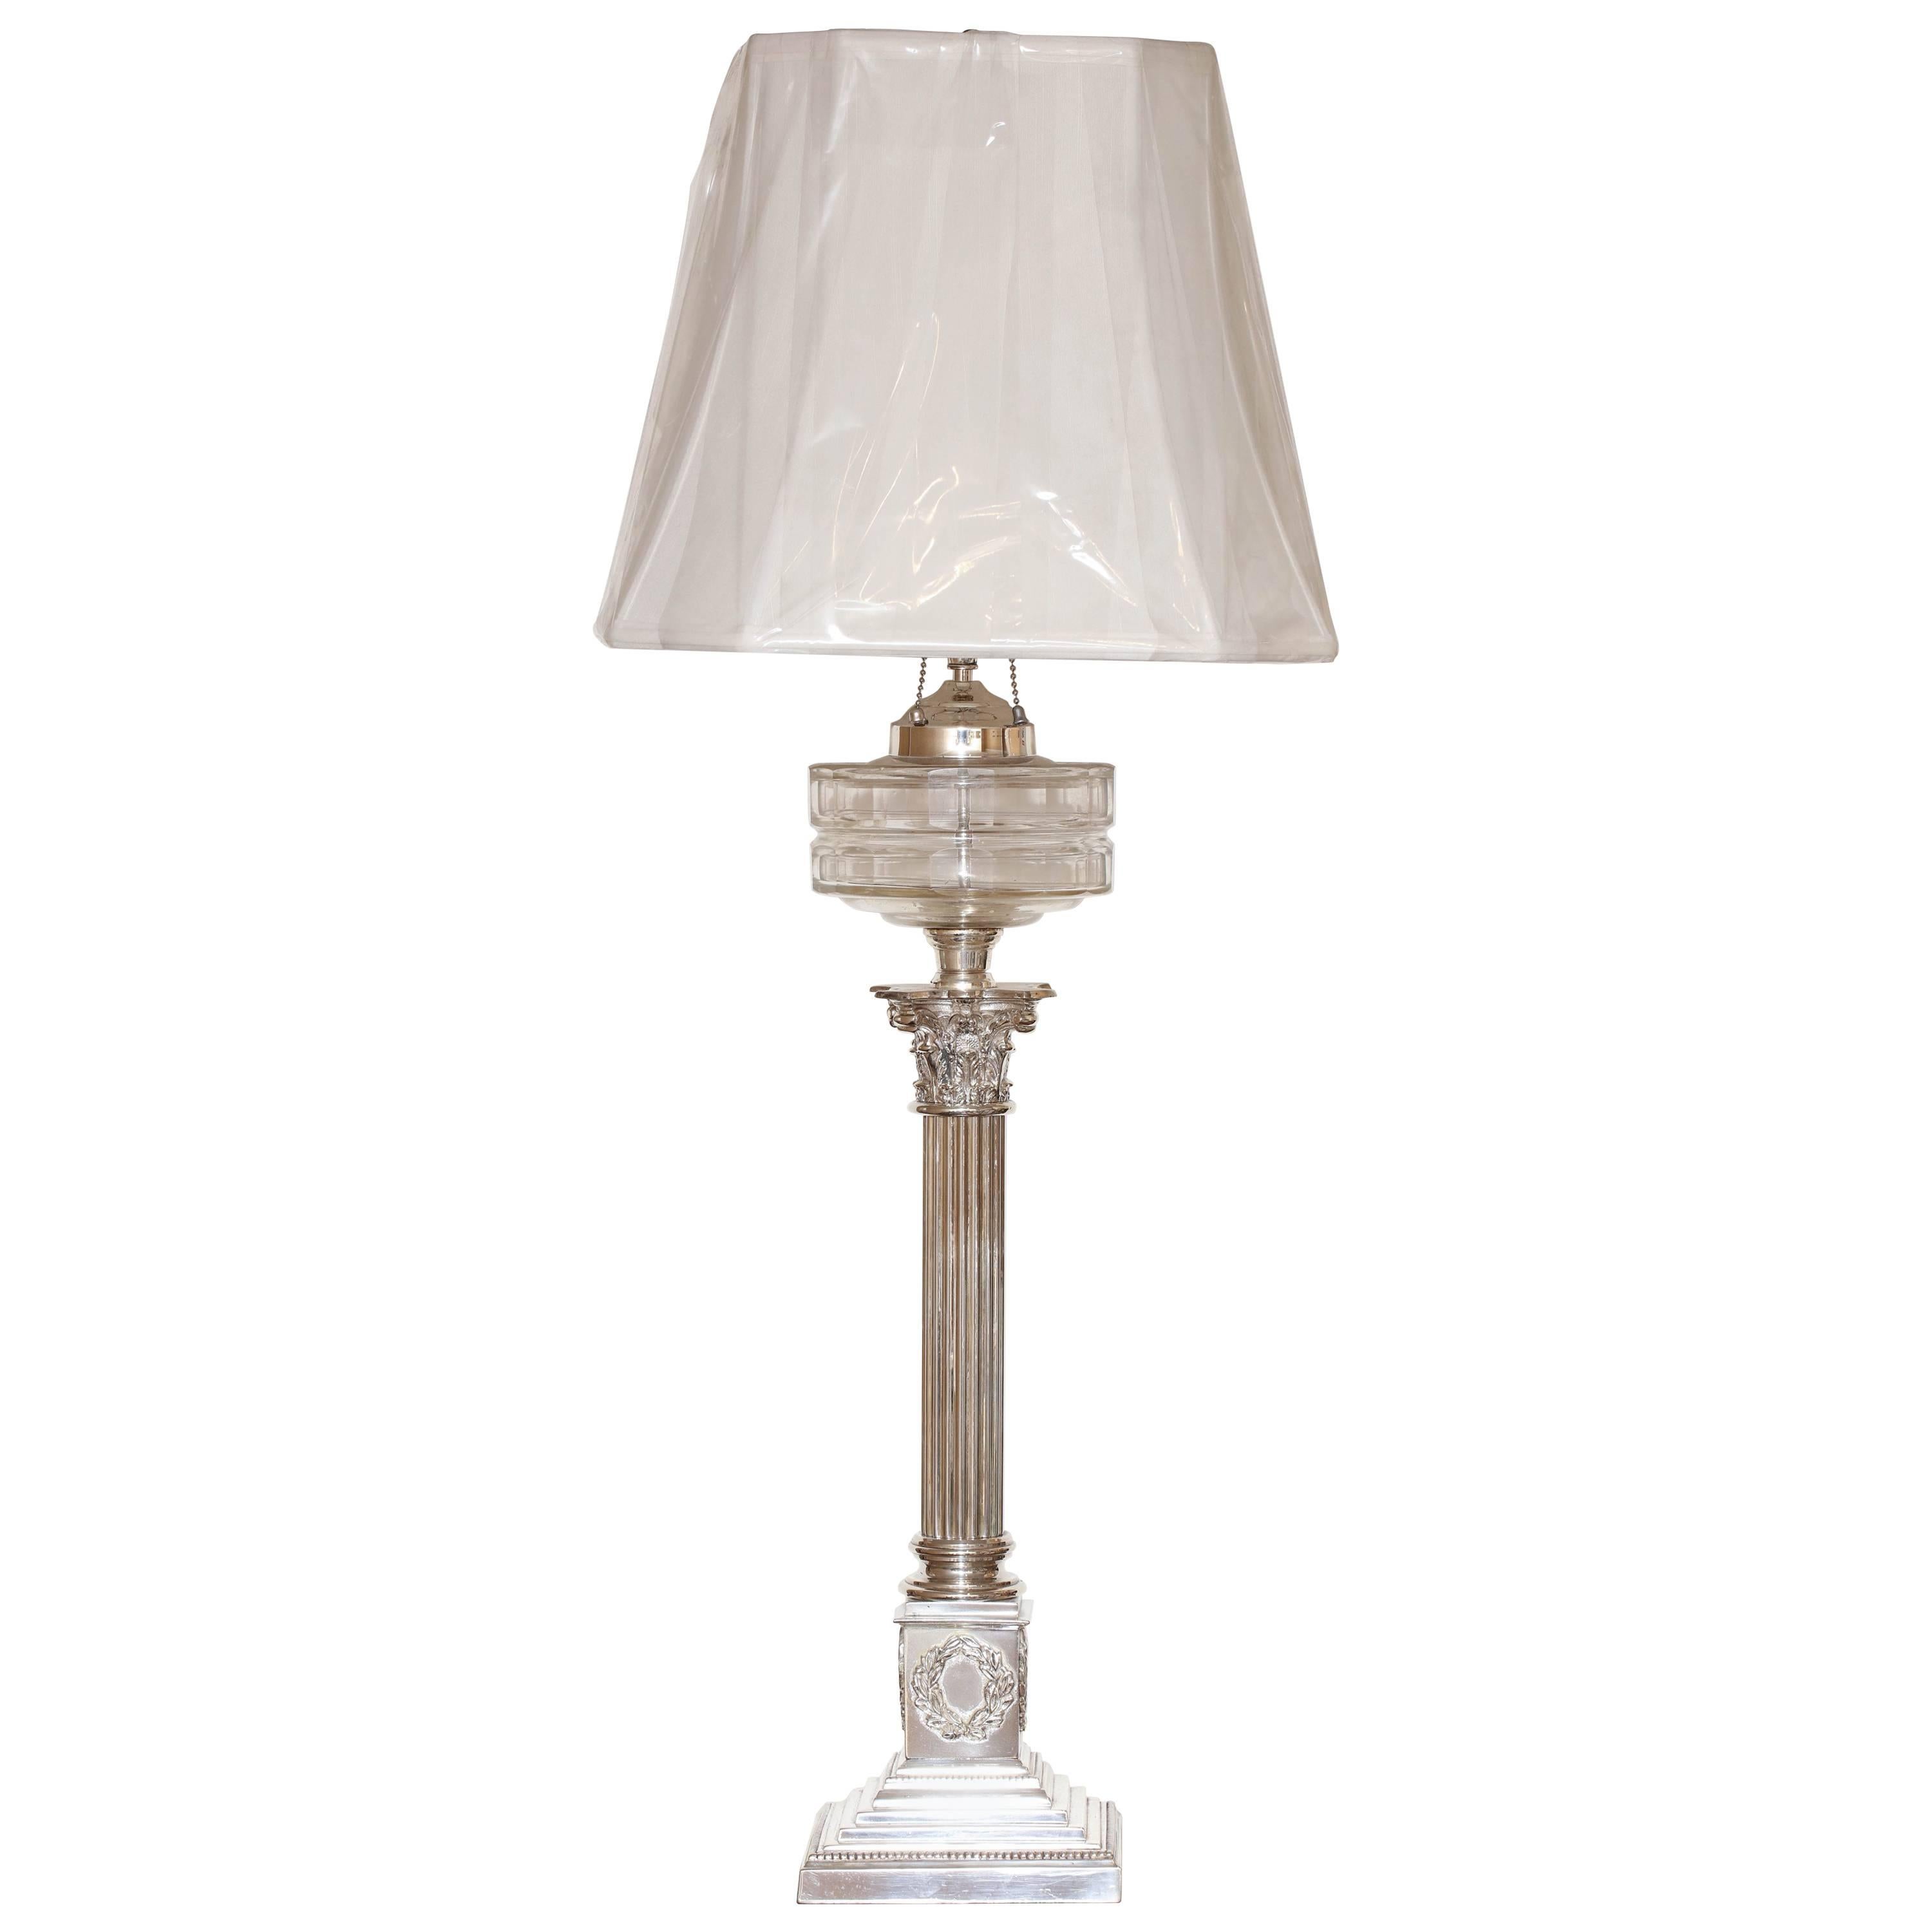 Tall Neoclassical Electrified Silver Plated Column-Form Oil Lamp